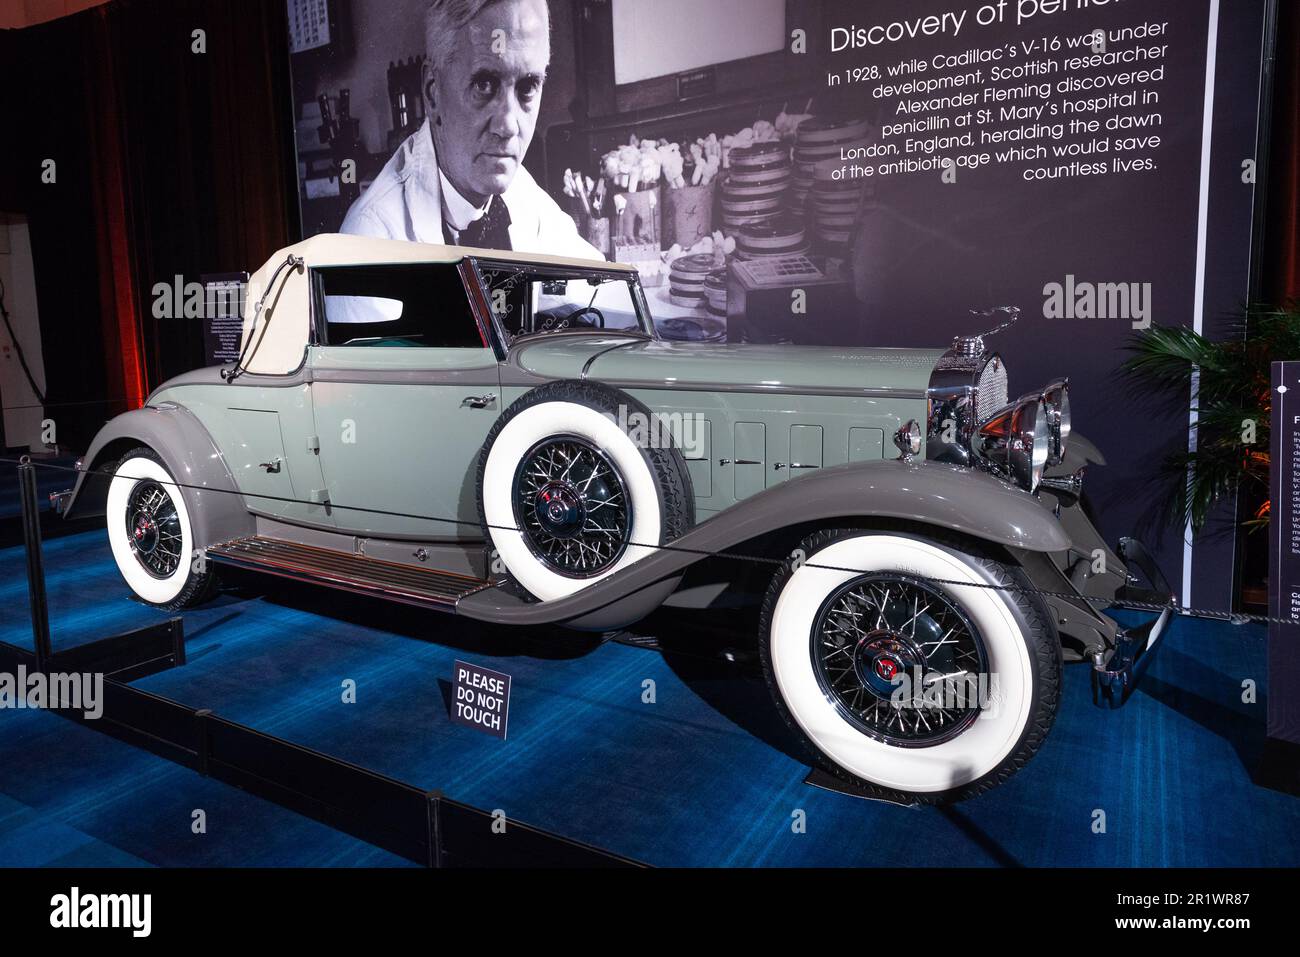 Toronto, ON, Canada - February 14, 2020: 1930 Cadillac V16 series 452 present at the the 2020 Canadian International AutoShow (Feb. 15-25) on at Metro Stock Photo